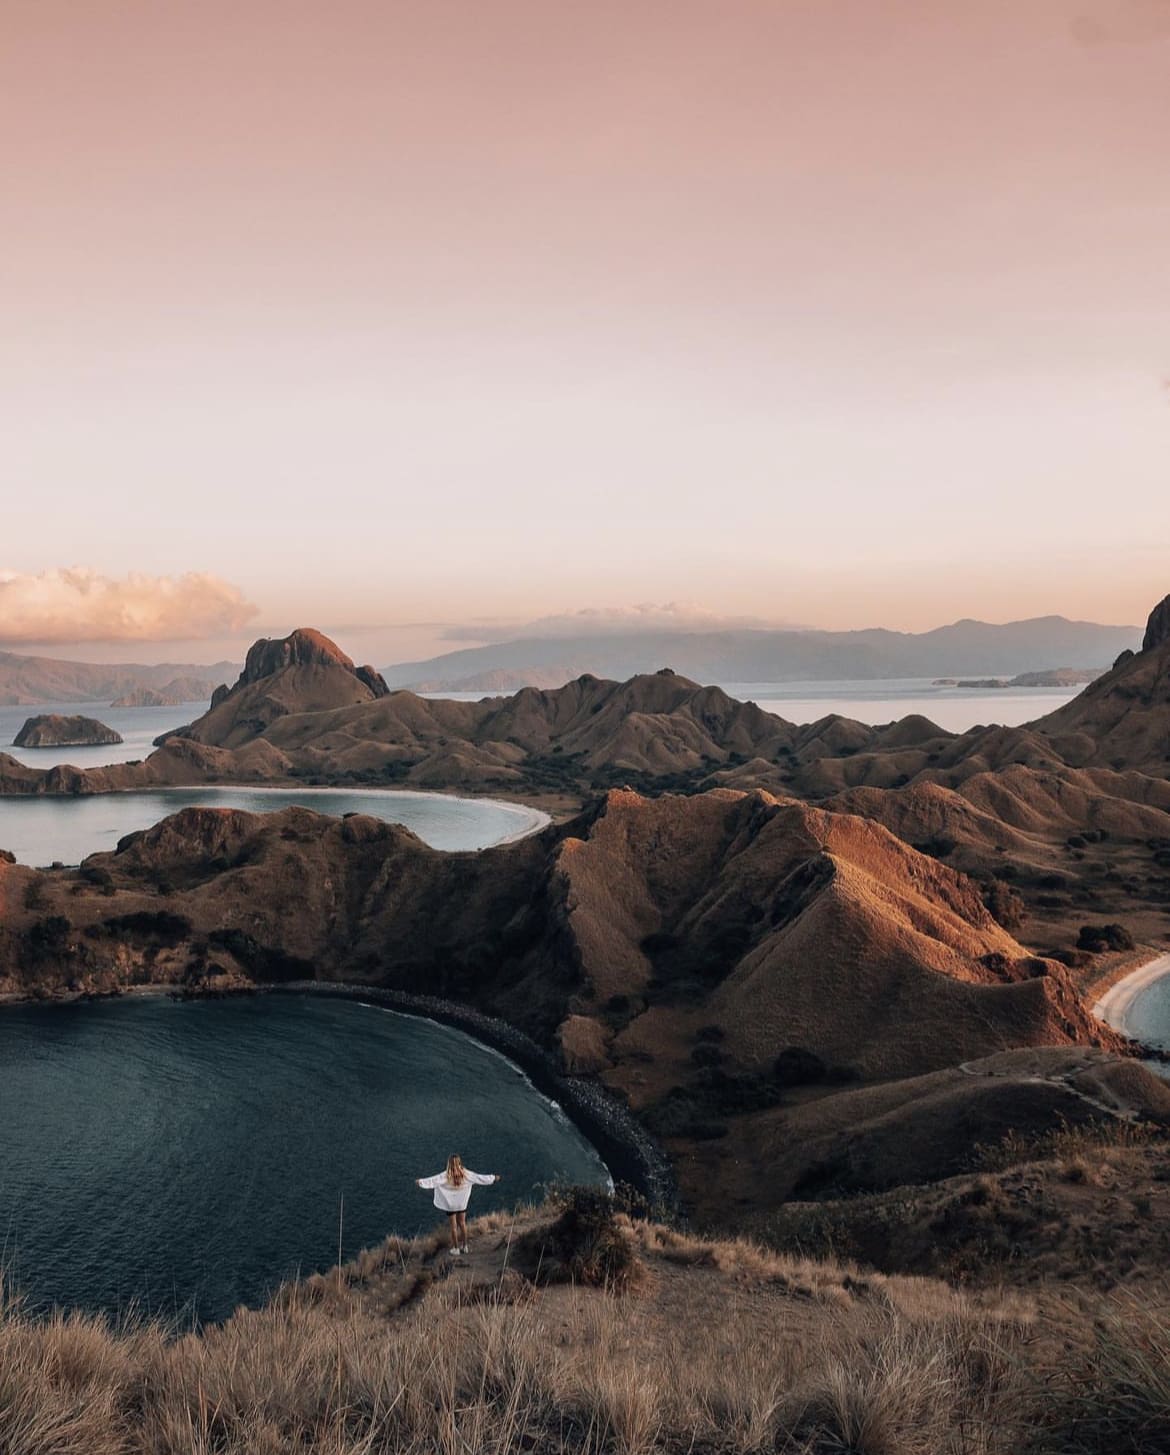 A girl looks over at the view of Komodo Island, Indonesia